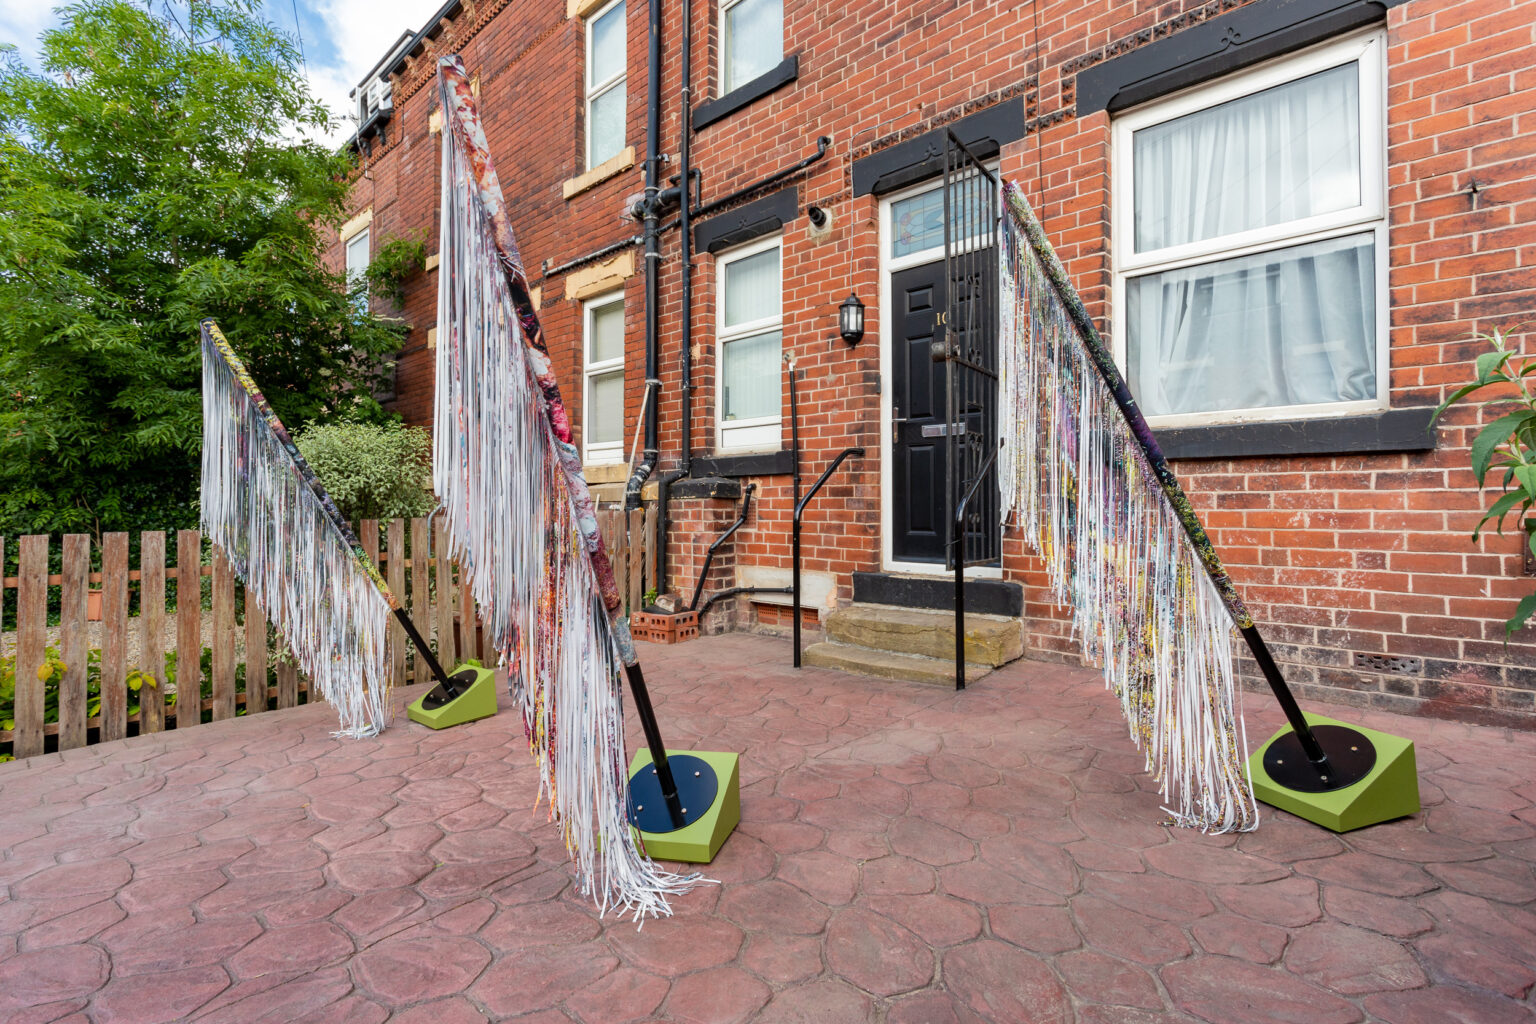 3 sculptures resembling flagpoles hung with fringed material are positioned in the paved back garden of a red-brick terraced house.